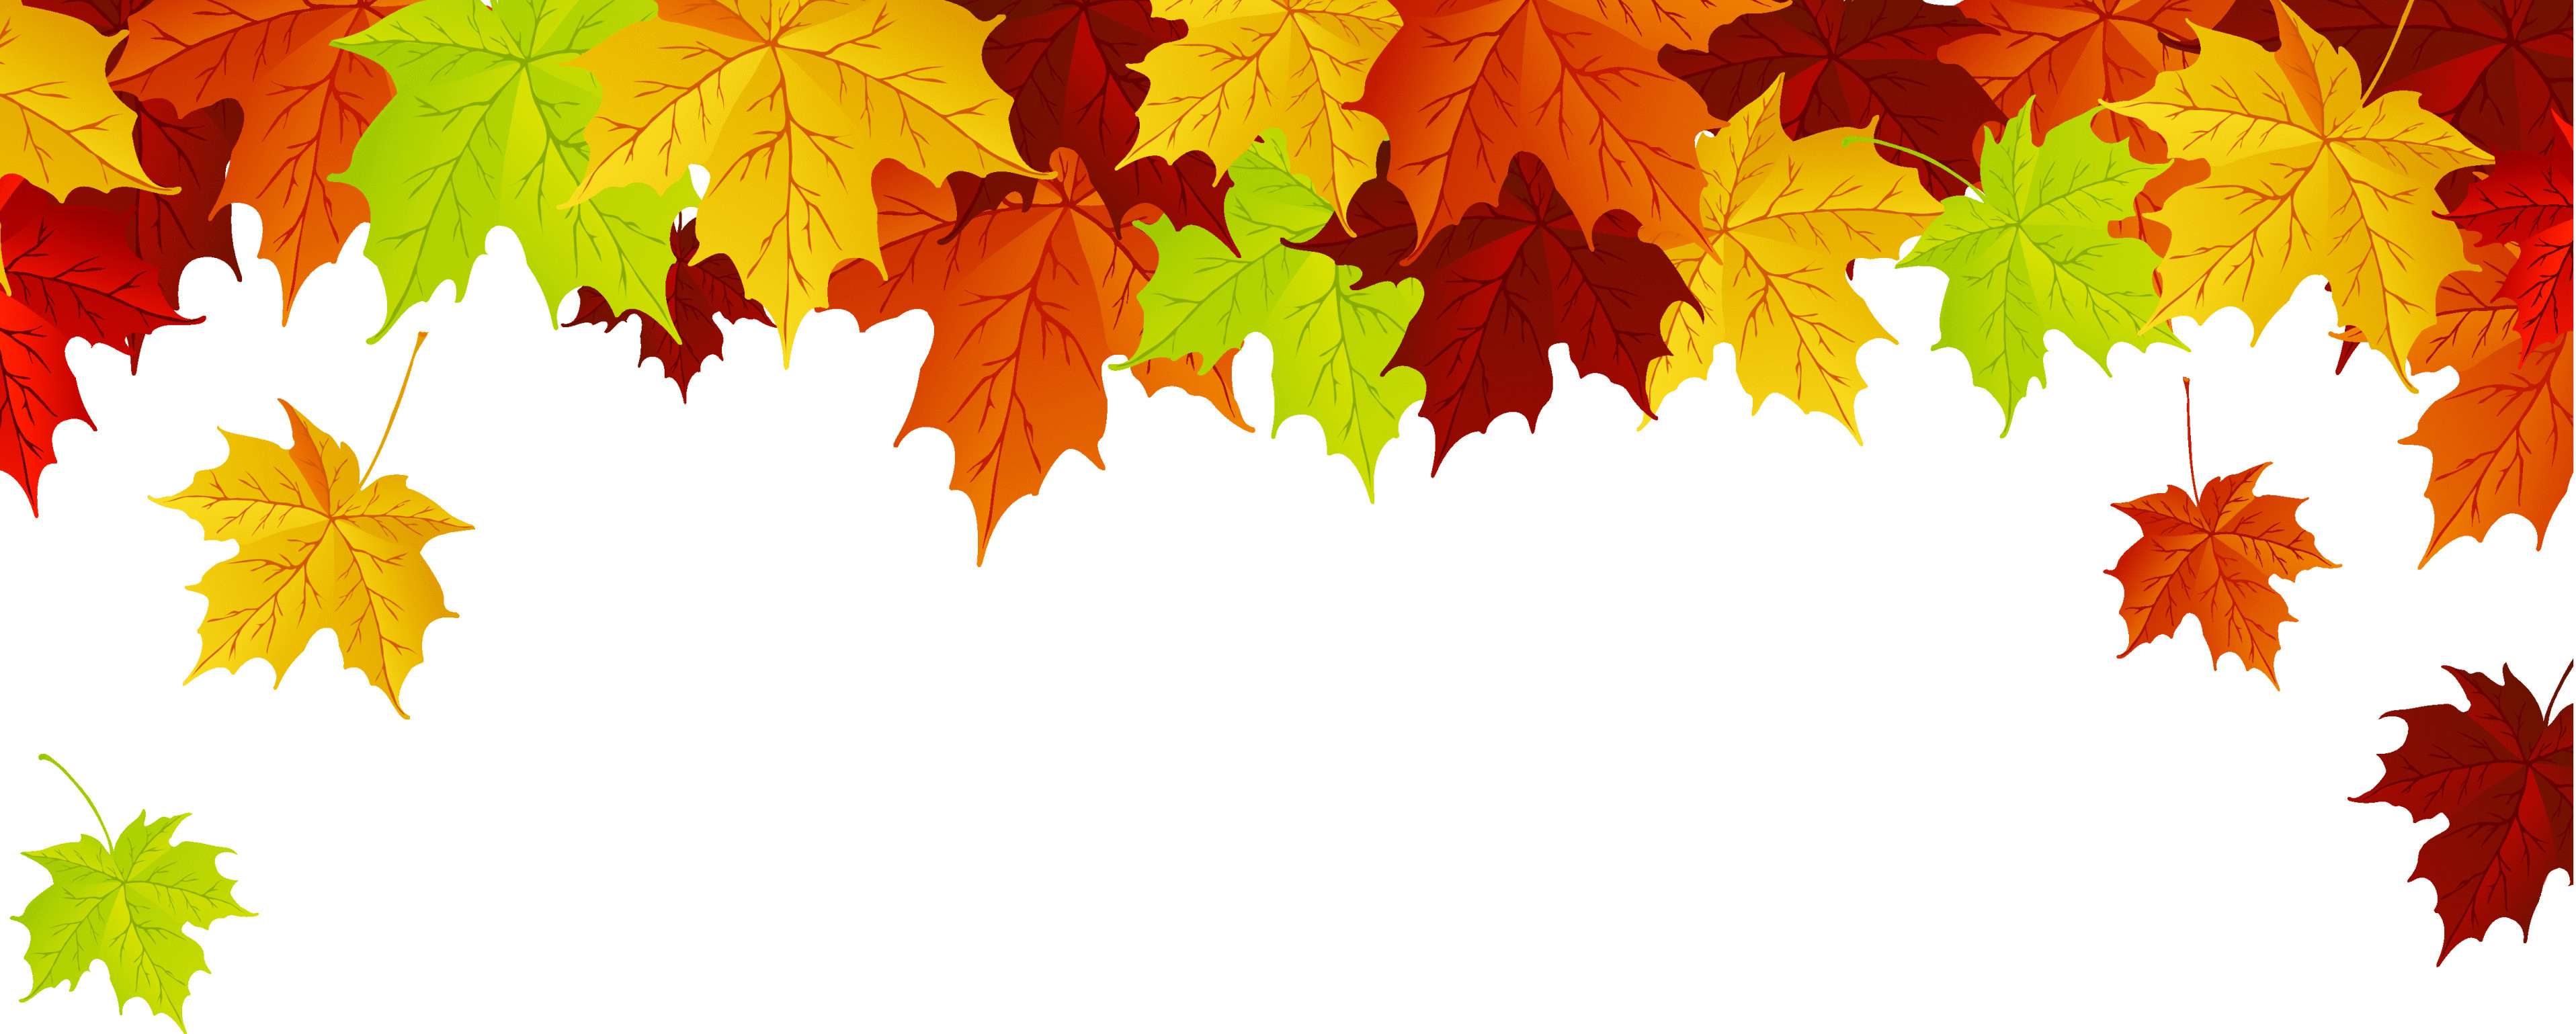 3833x1539 Fall Leaves Backgrounds Flowers Gallery 